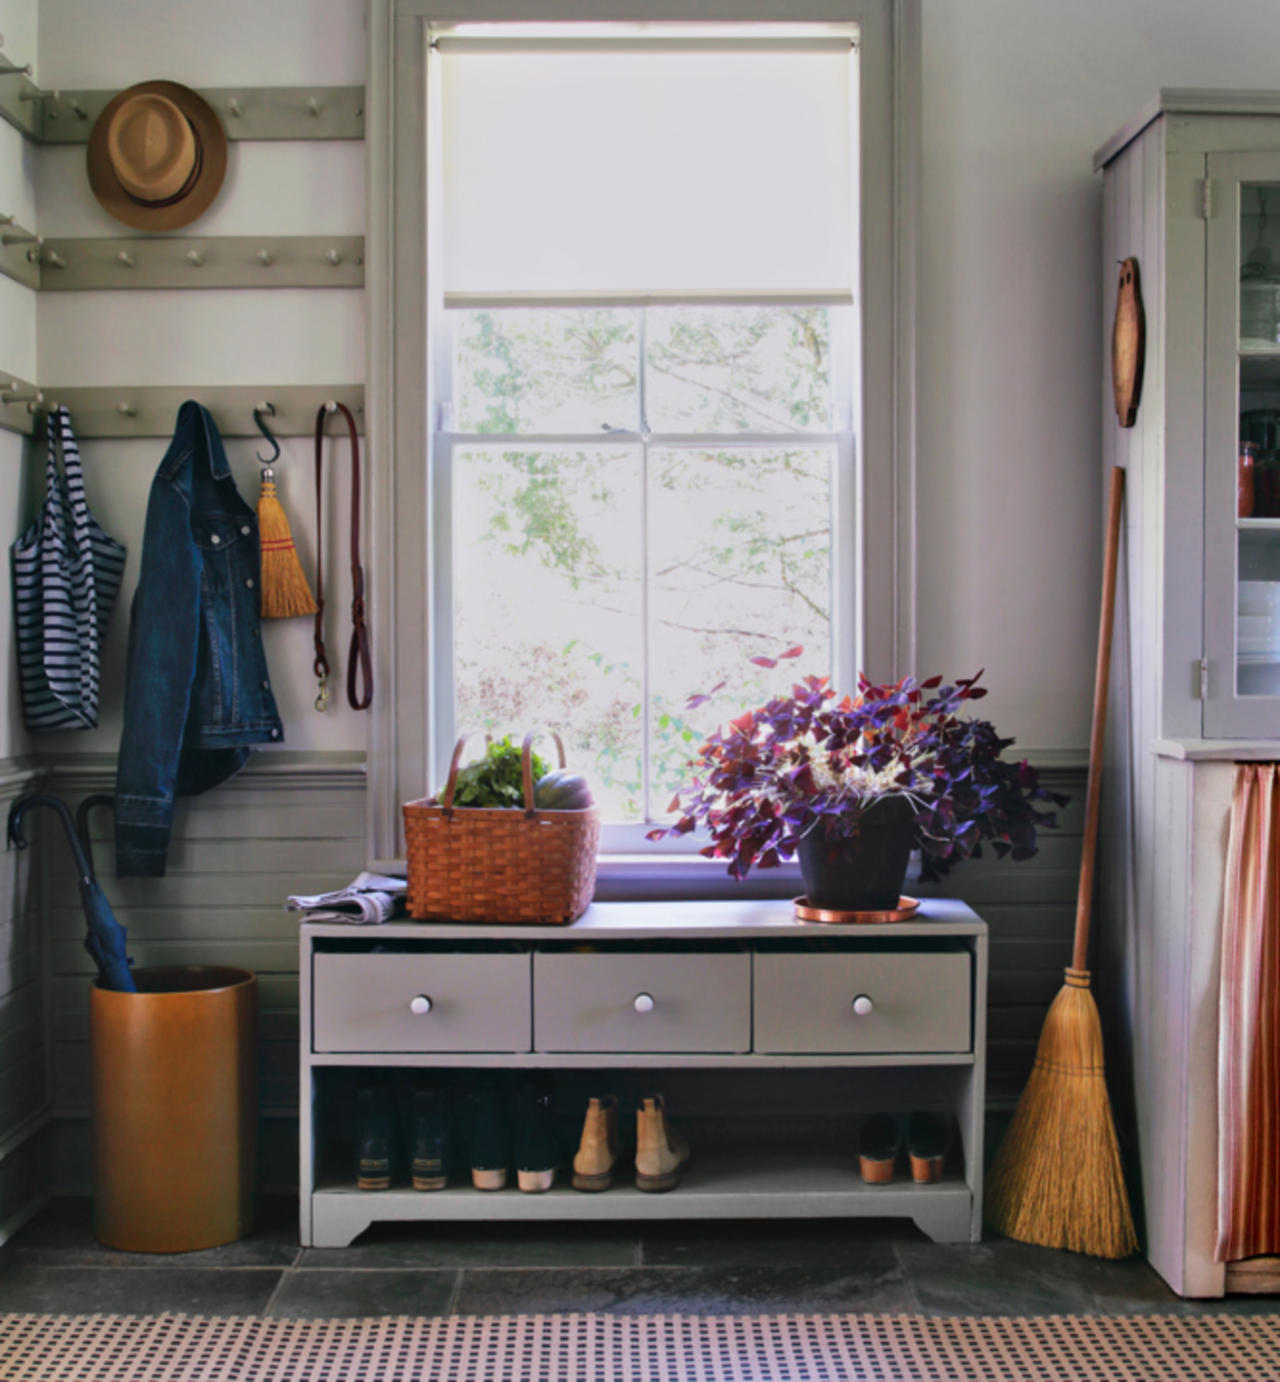 What Is a Mudroom?